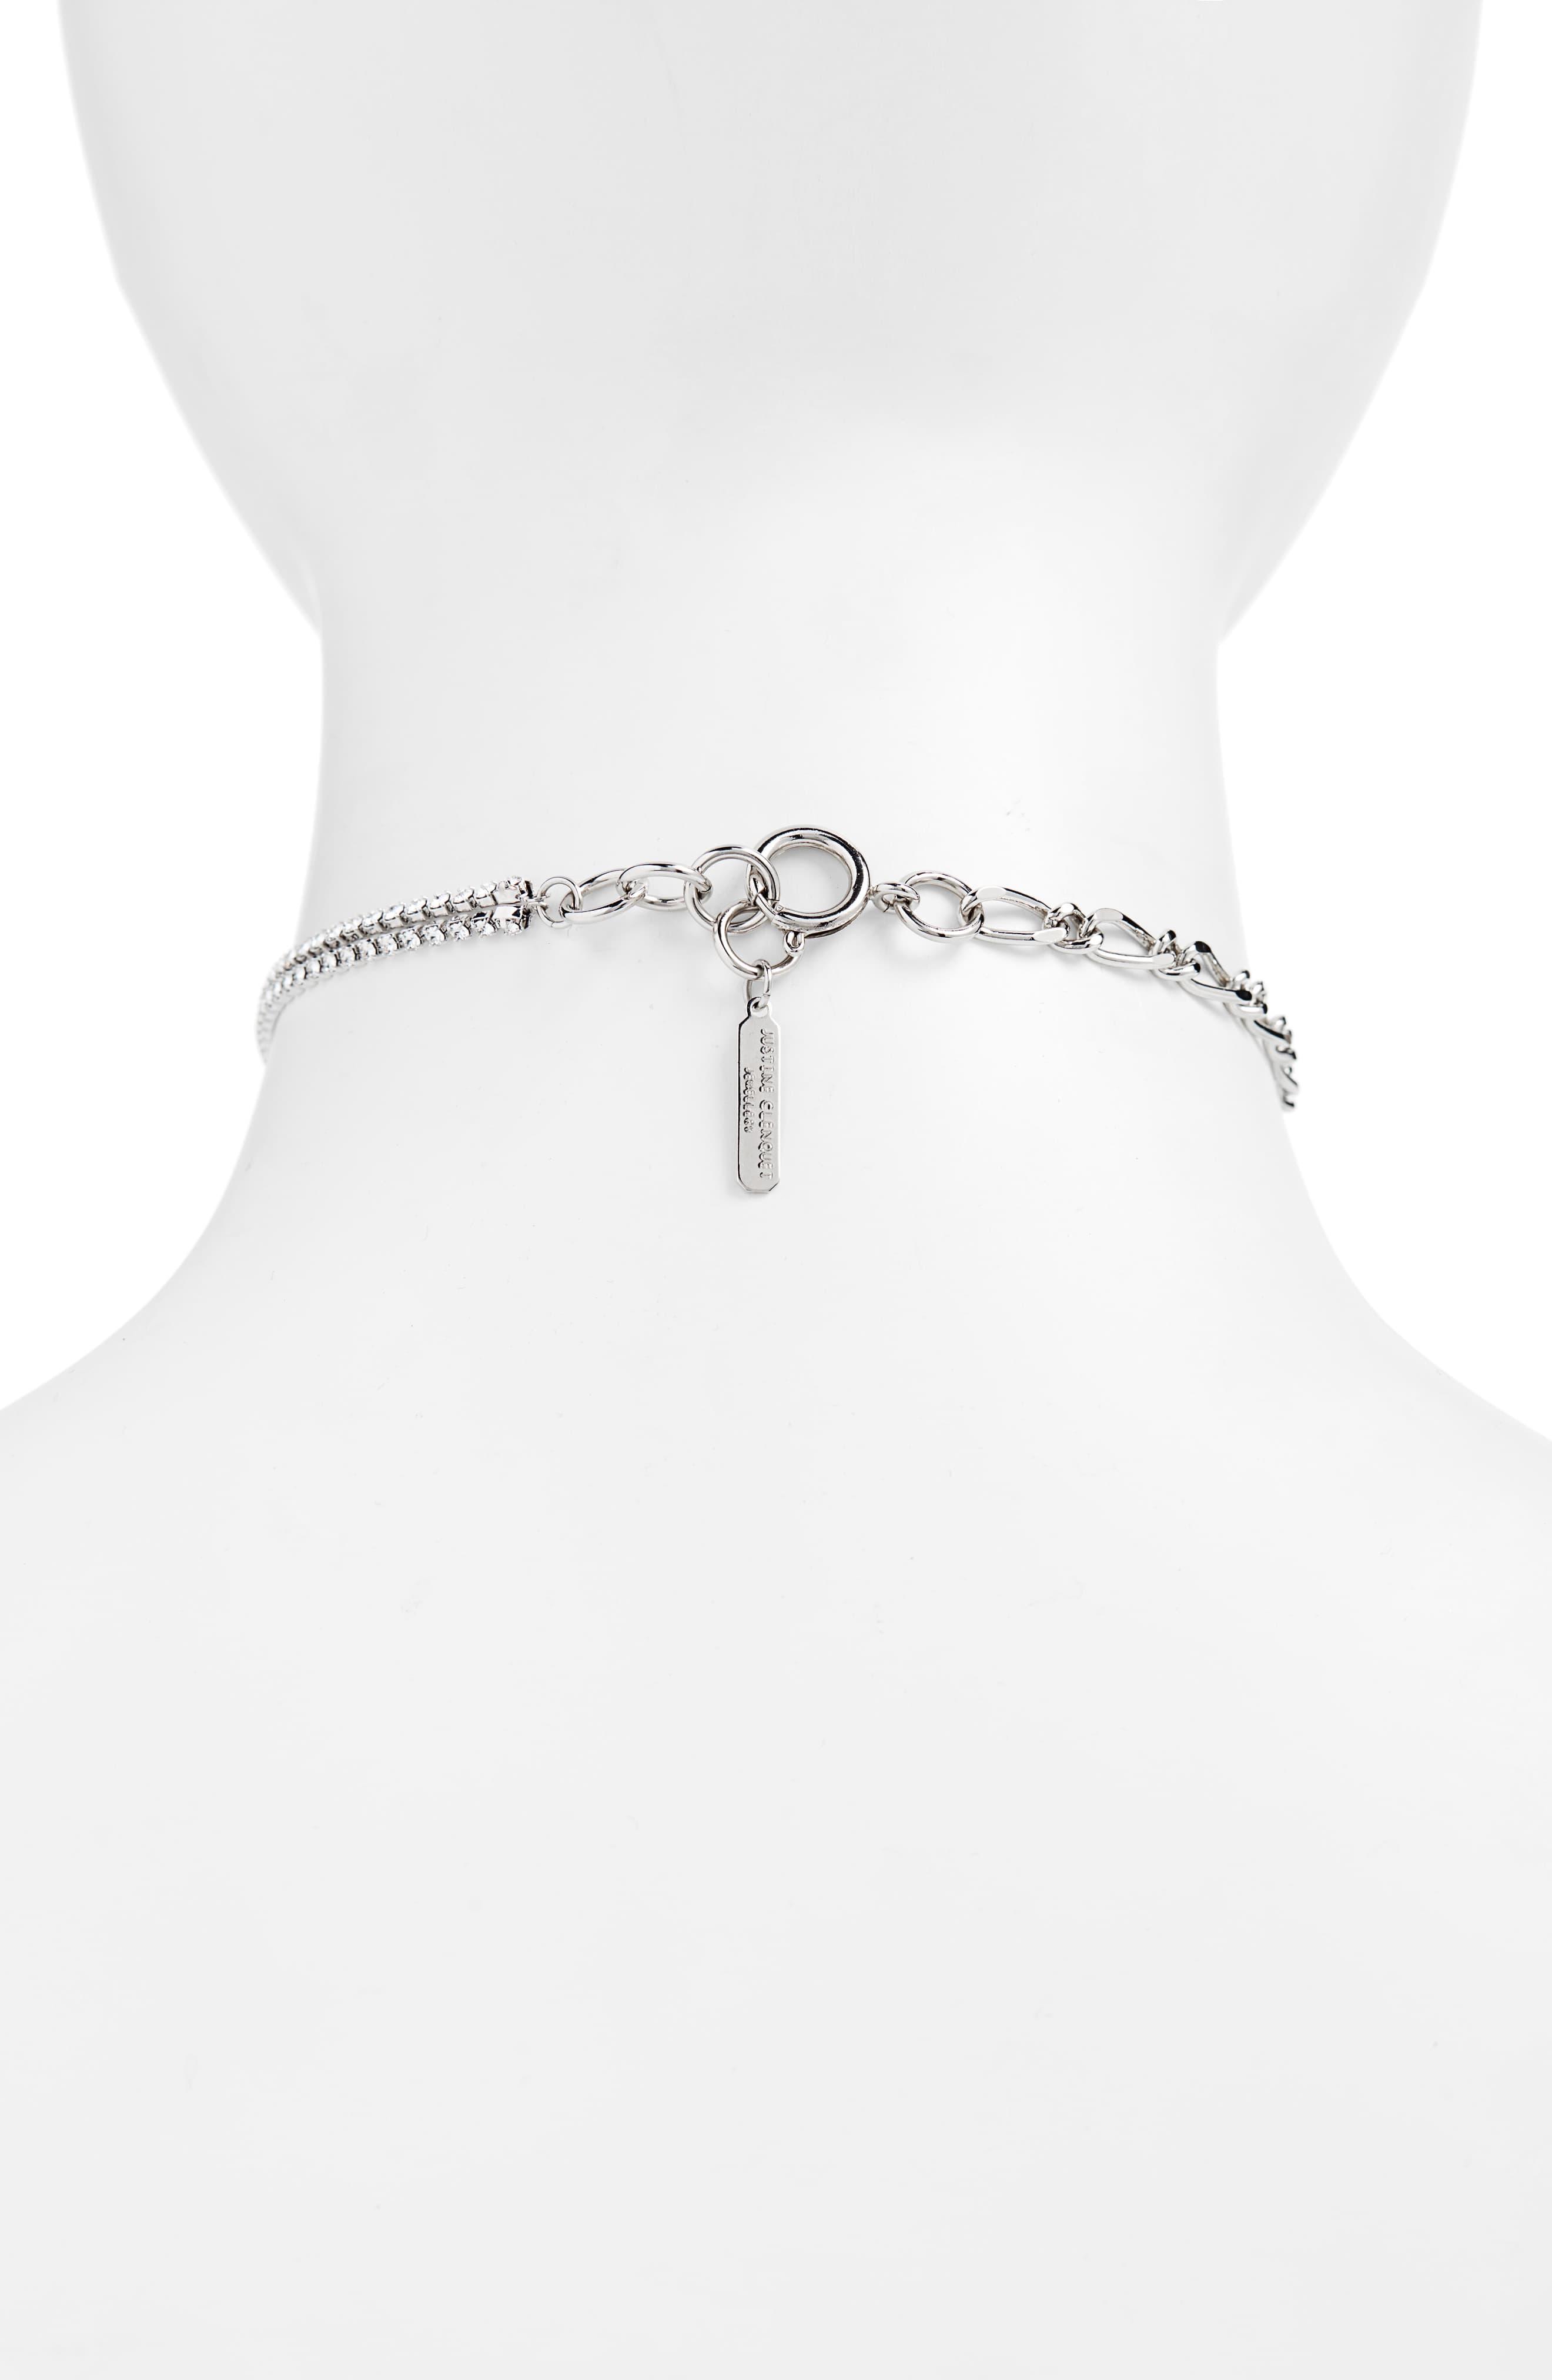 Justine Clenquet Roxy Crystal & Chain Choker in White - Lyst